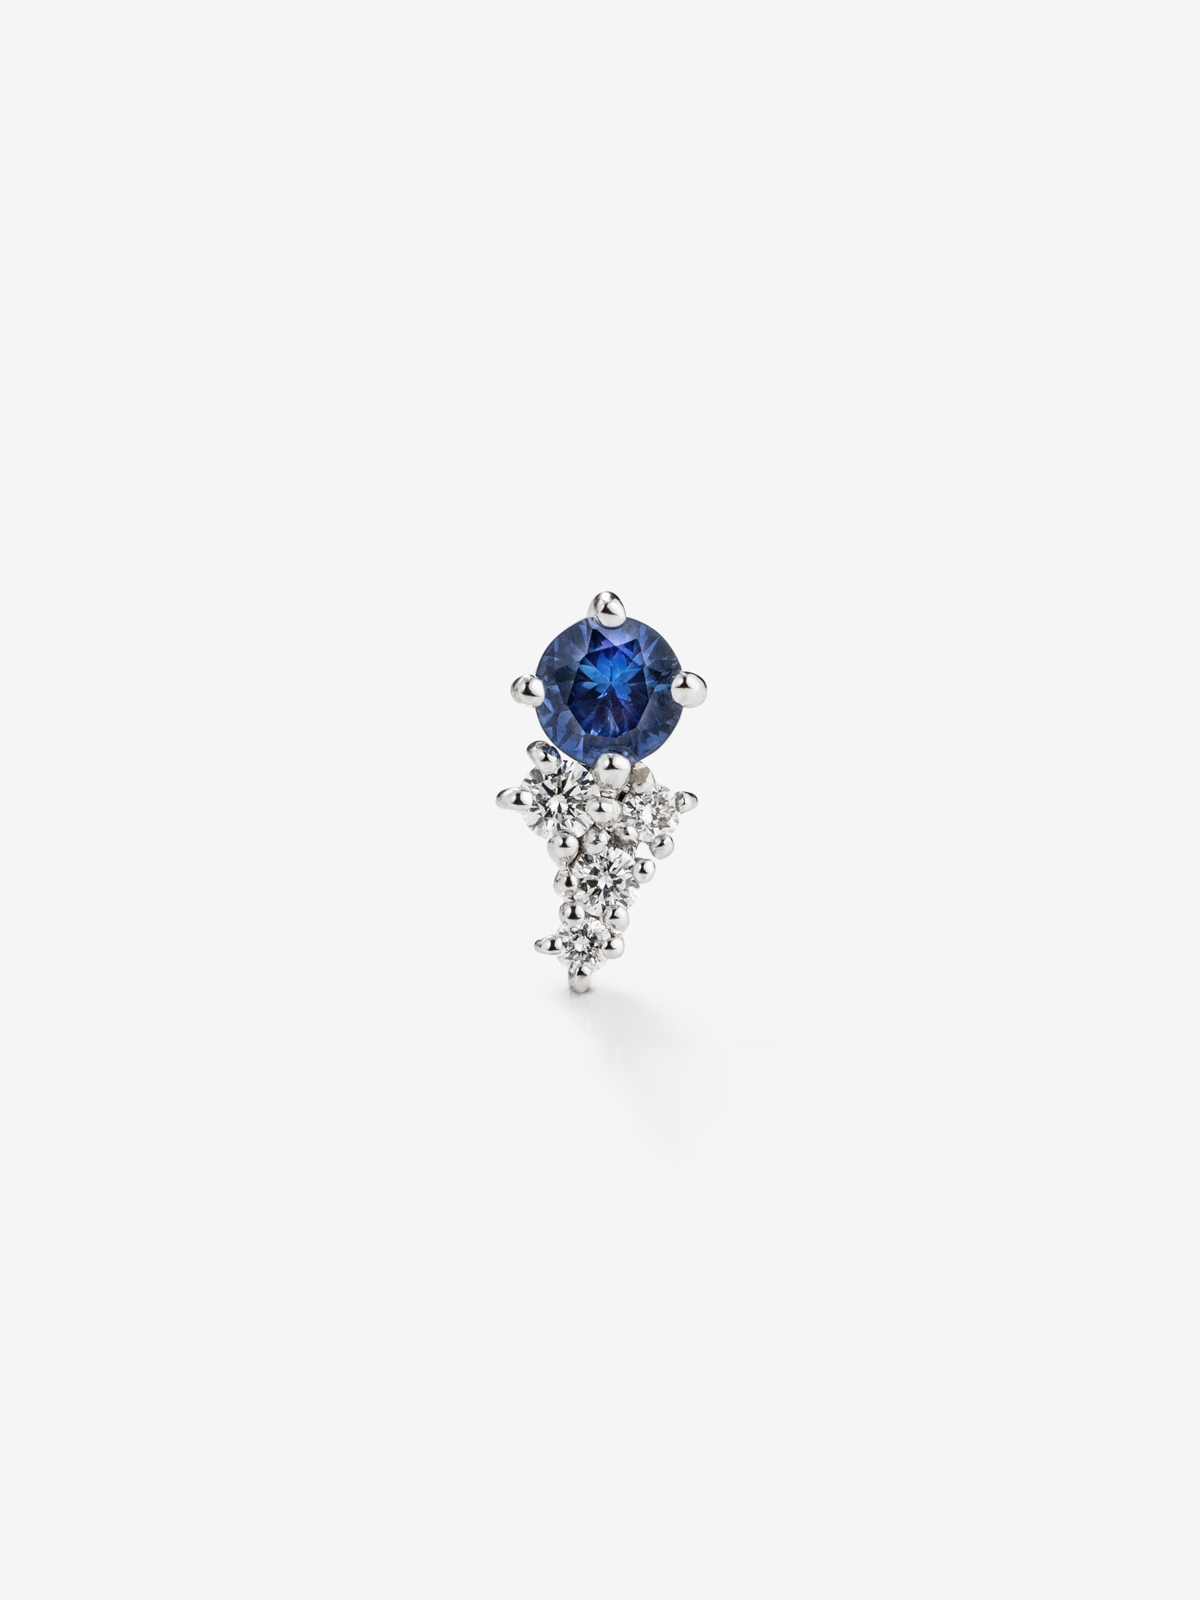 Right individual earring made of 18K white gold with sapphire and diamonds.